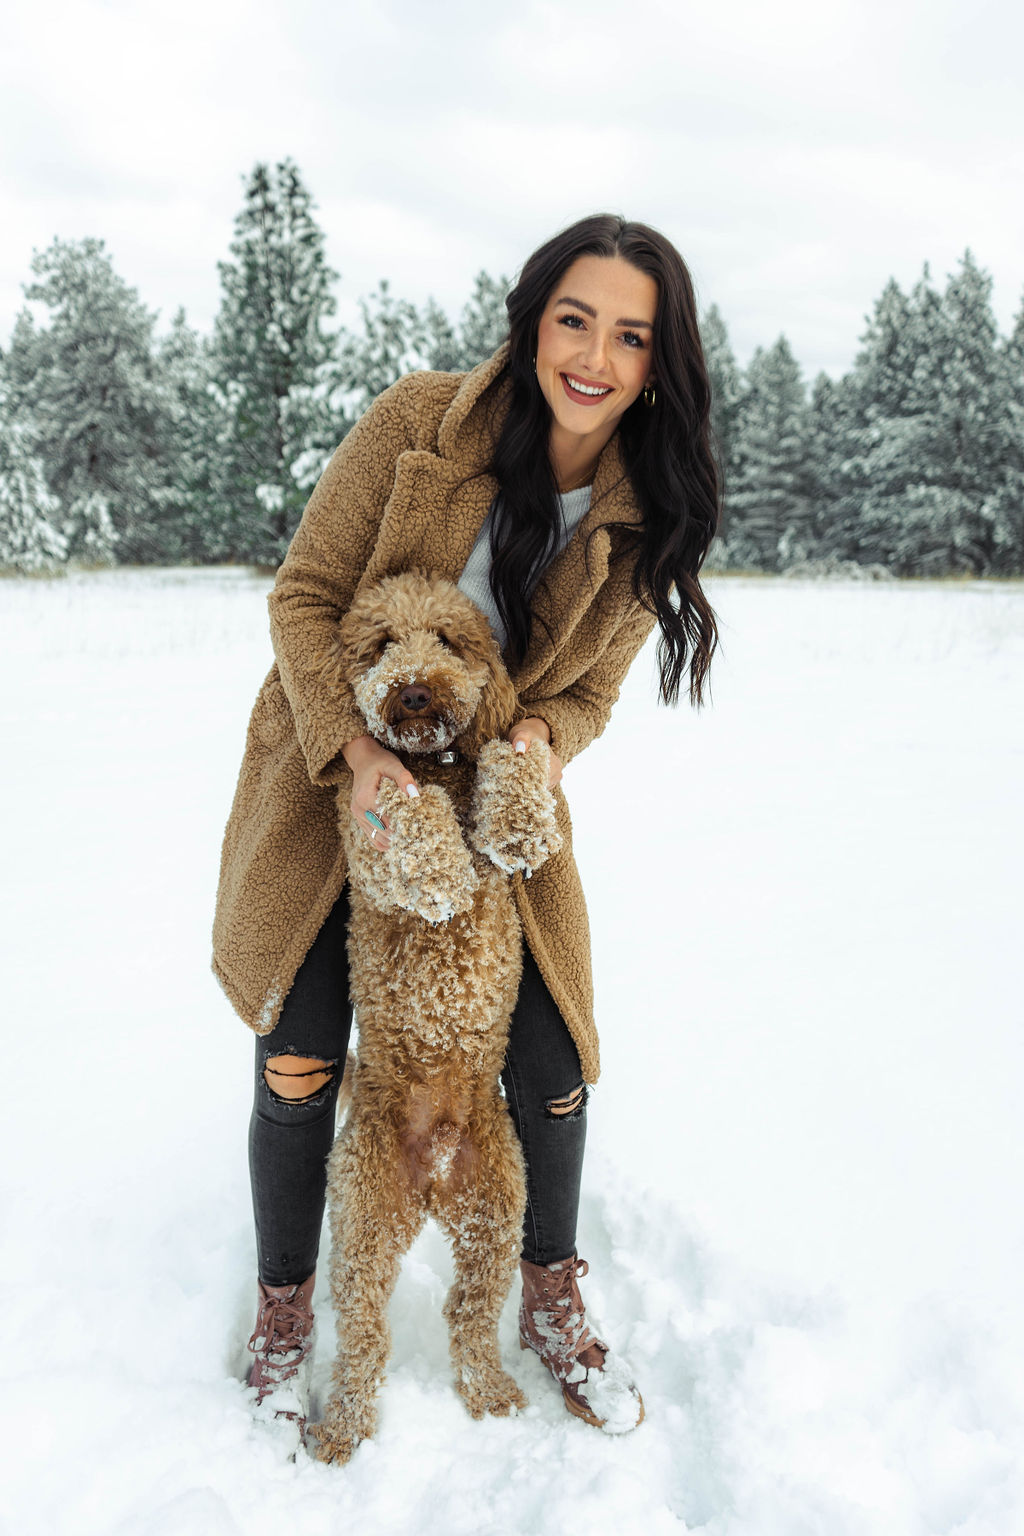 Skyler Anderson with her dog in the snow.